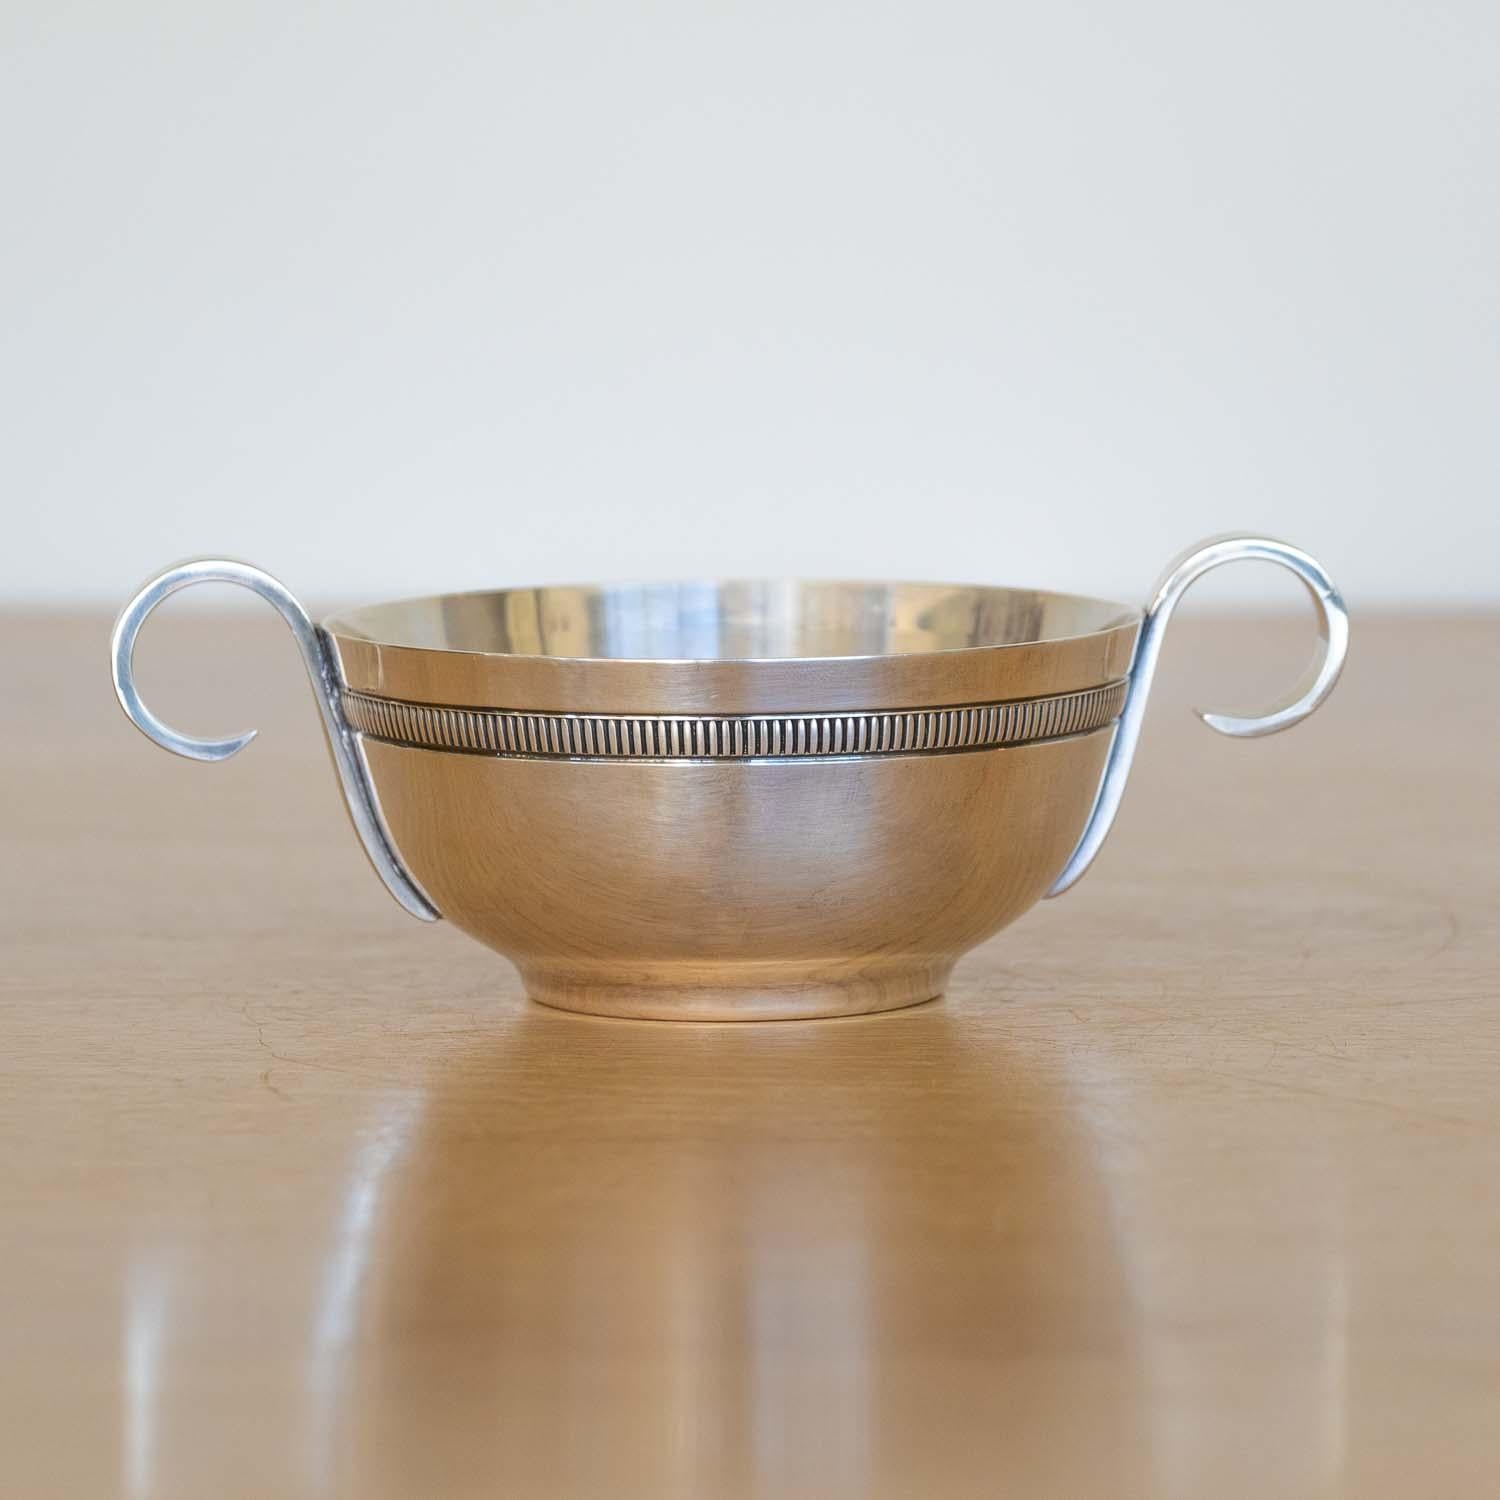 Beautiful petite silver bowl from France, 1930's. Stunning Art Deco piece with loop handle detail. Original finish shows great age and patina. Perfect as a decorative object or catchall. Stamped on underside.